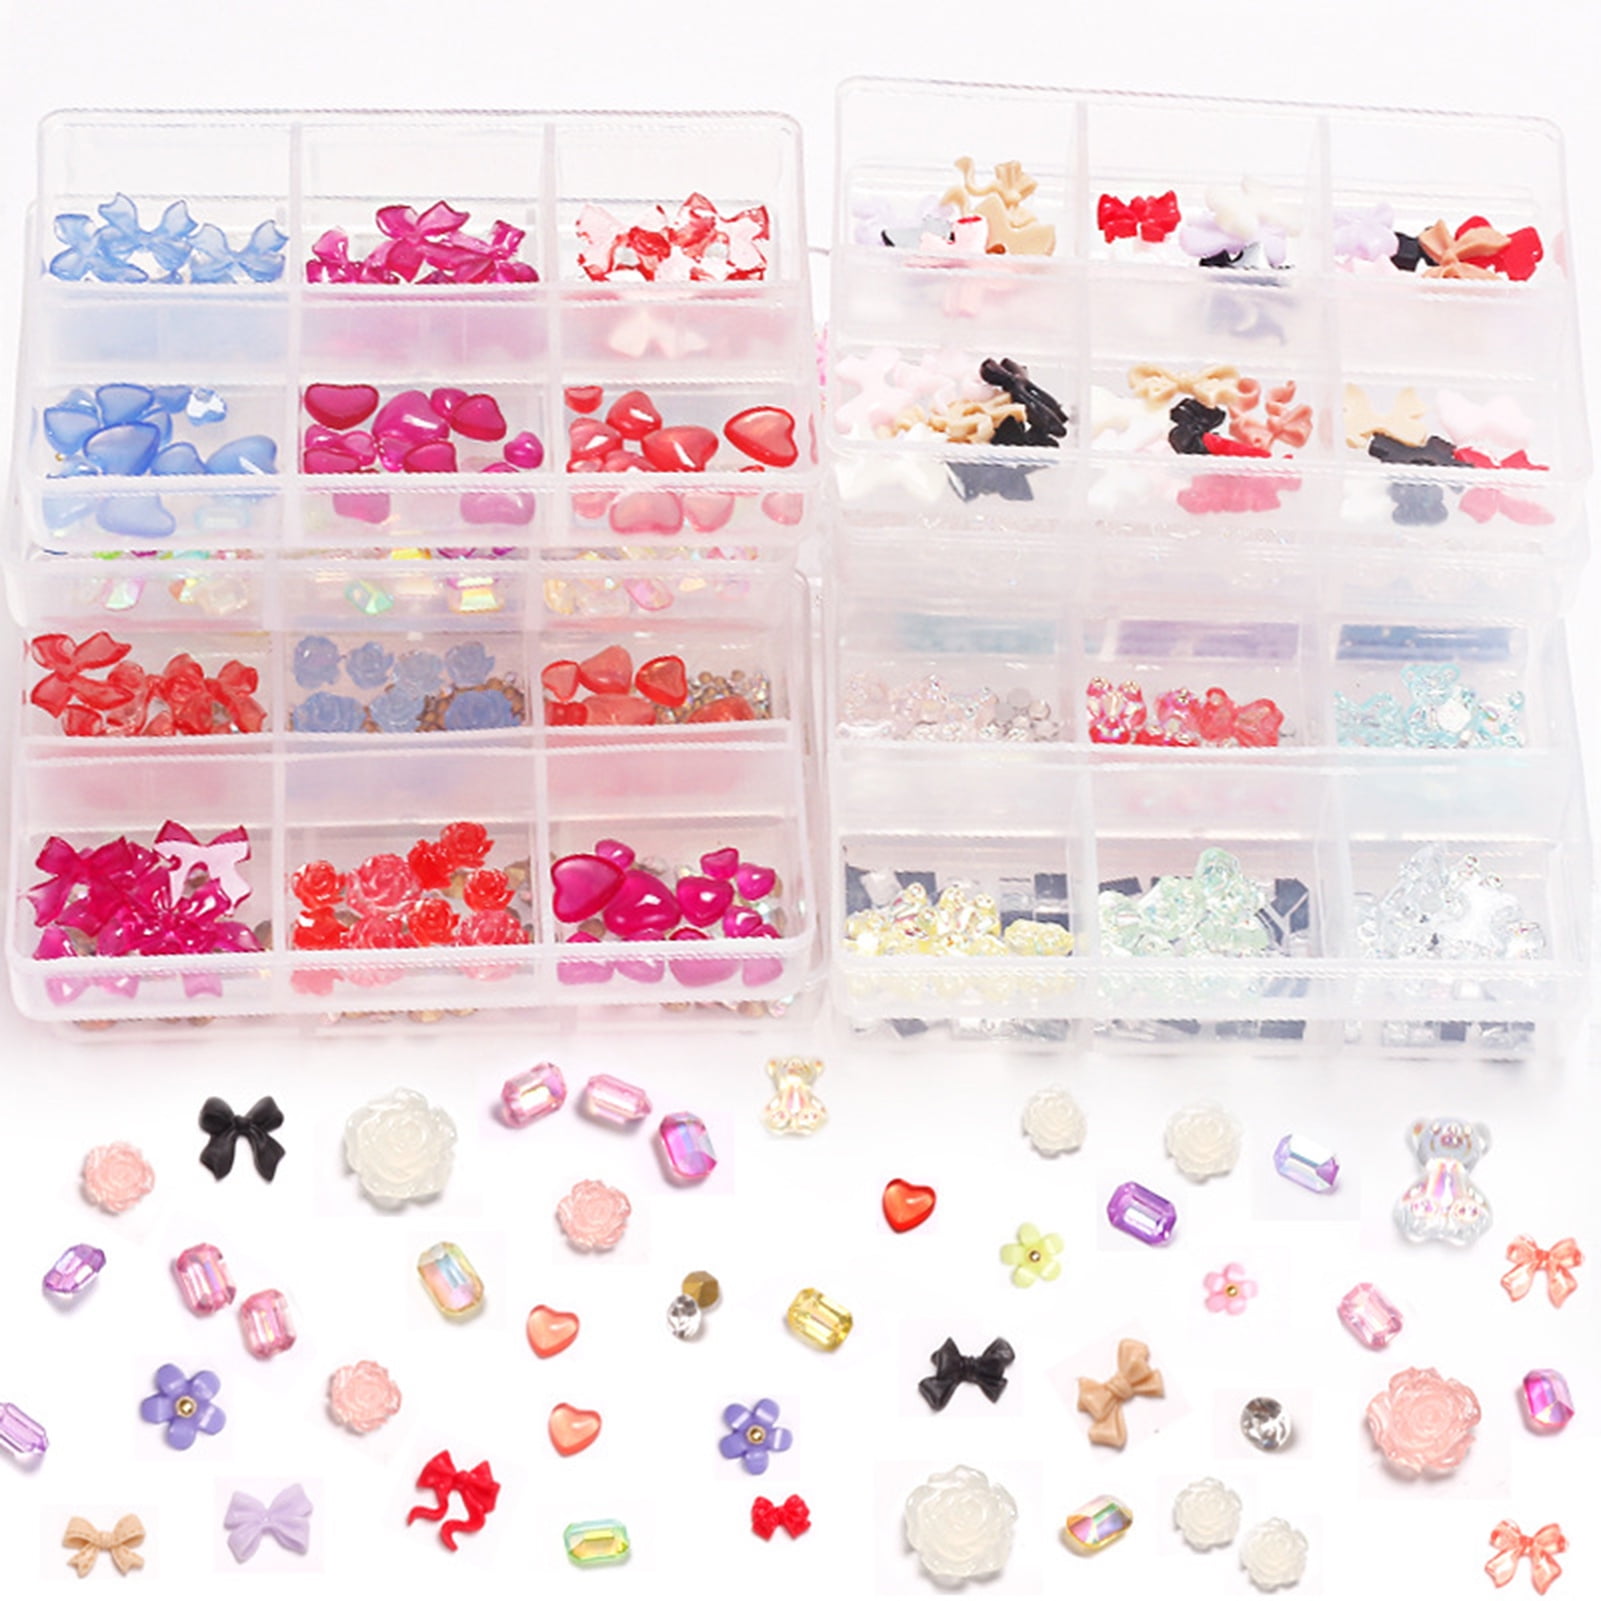 opvise Resin Nail Decoration Bear Bow Flower Heart 3D Charms ...